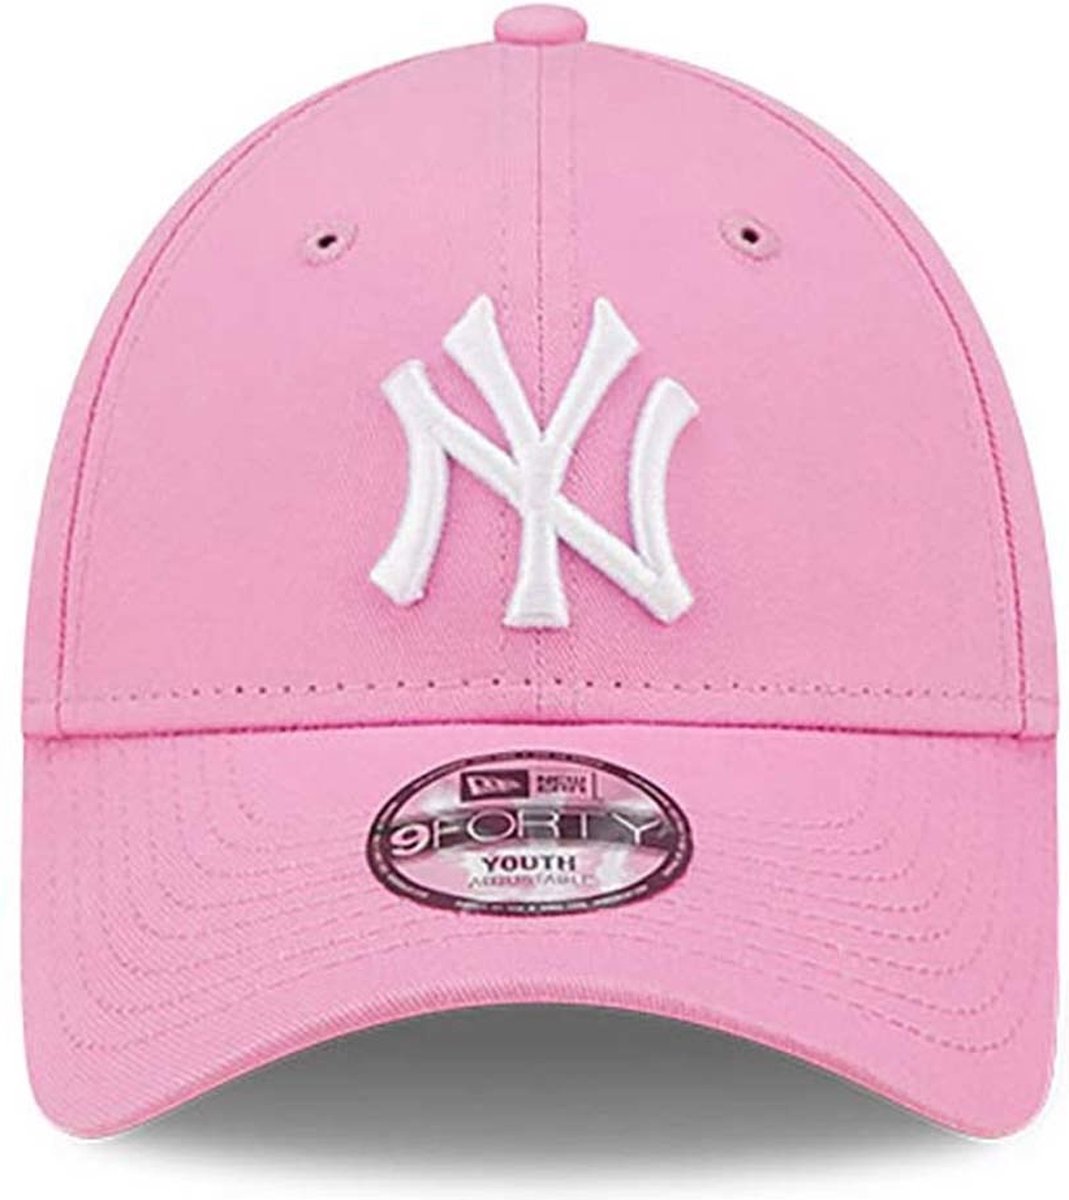 Casquette New York Yankees MLB 9Forty Youth Pink White 6-14 ans | bol.com